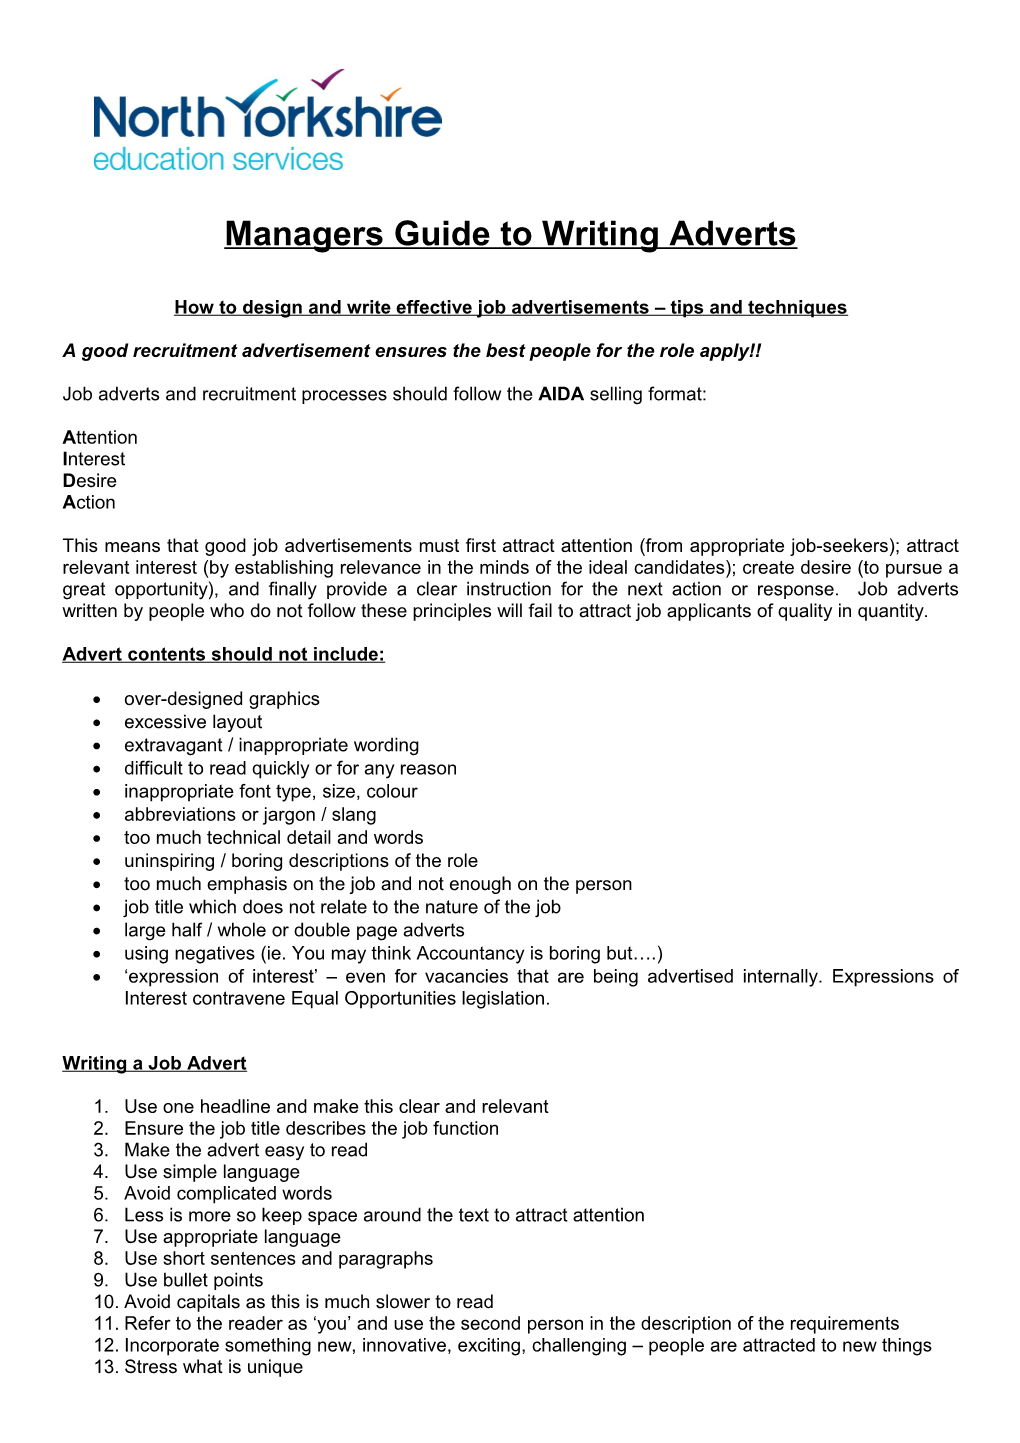 Managers Guide to Writing Adverts